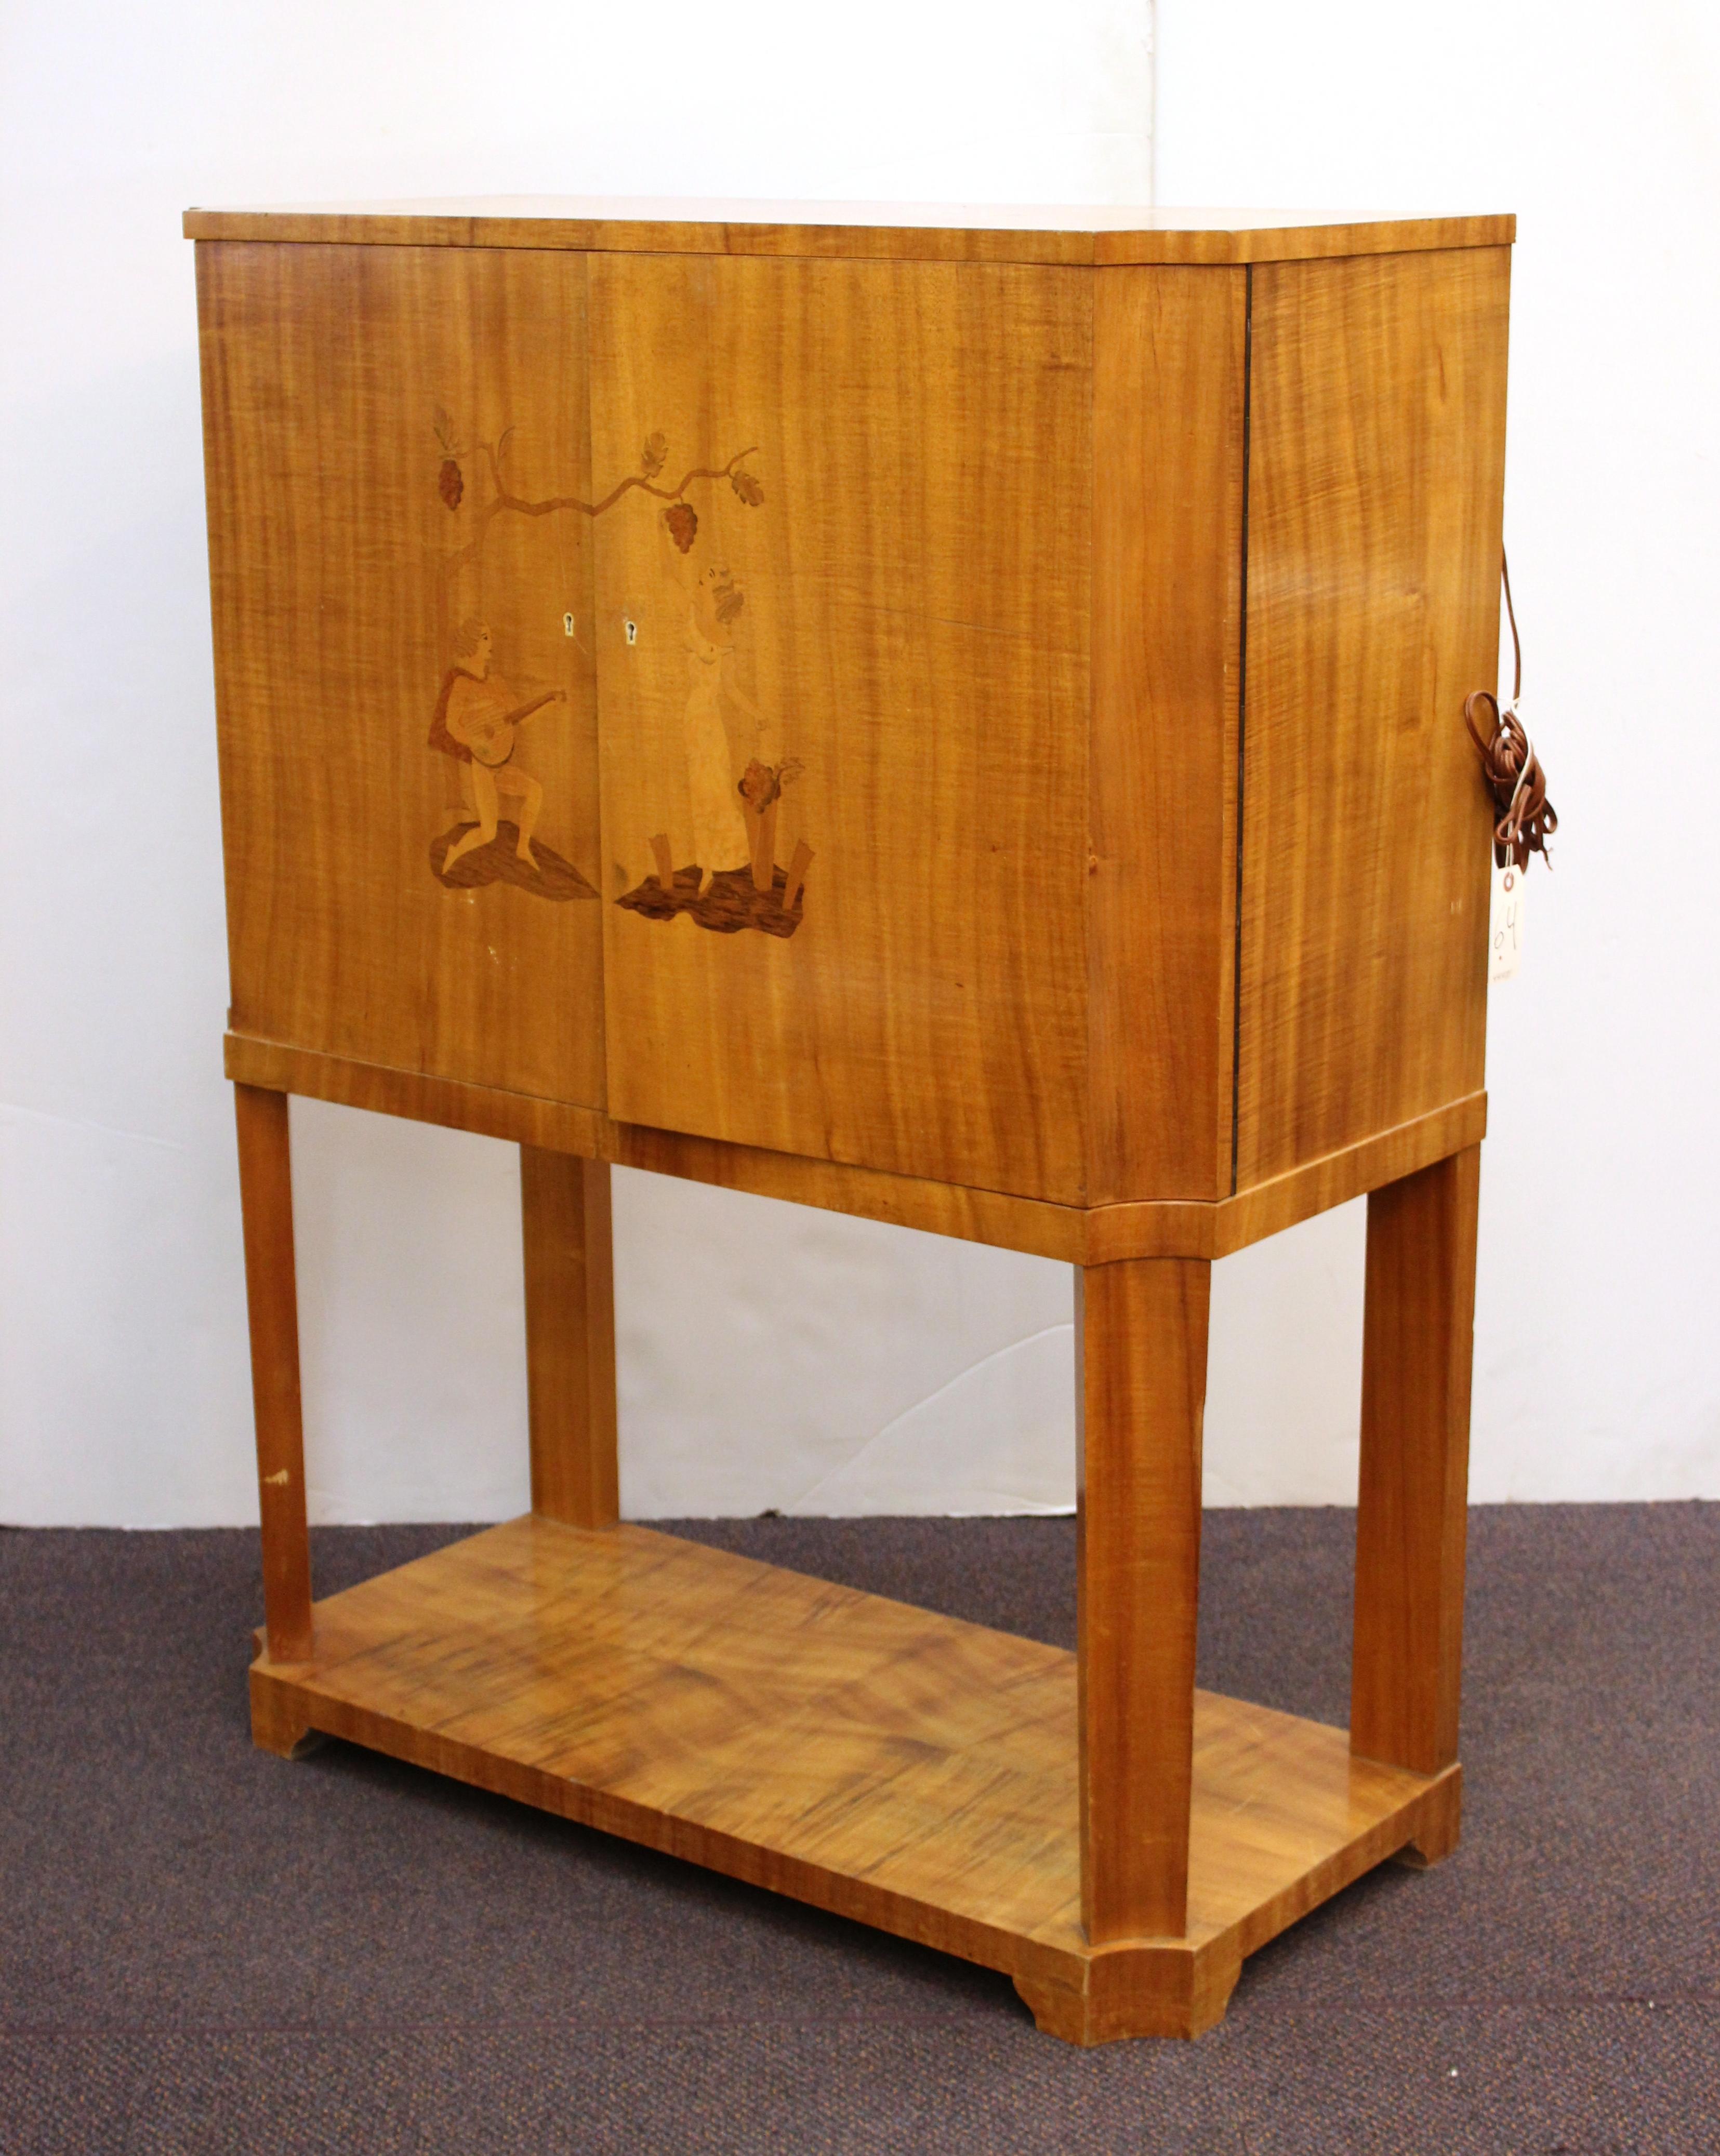 20th Century Swedish Art Deco Dry Bar or Bar Cabinet in Blonde Wood with Inlaid Illustration